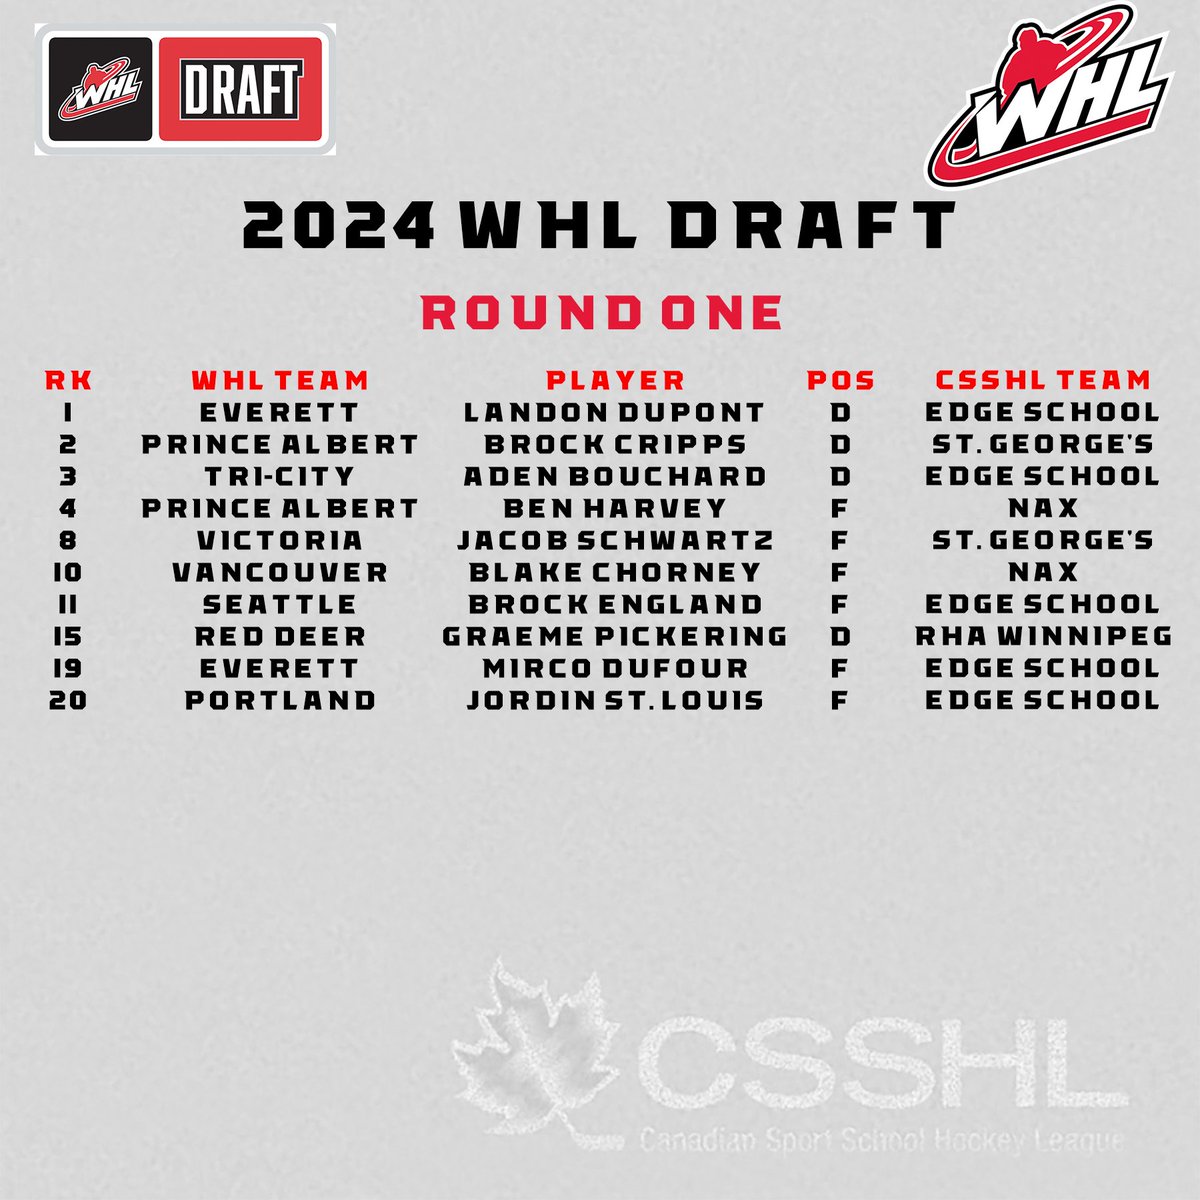 Congratulations to the 10 CSSHL student-athletes selected in the first round of the 2024 WHL Draft!